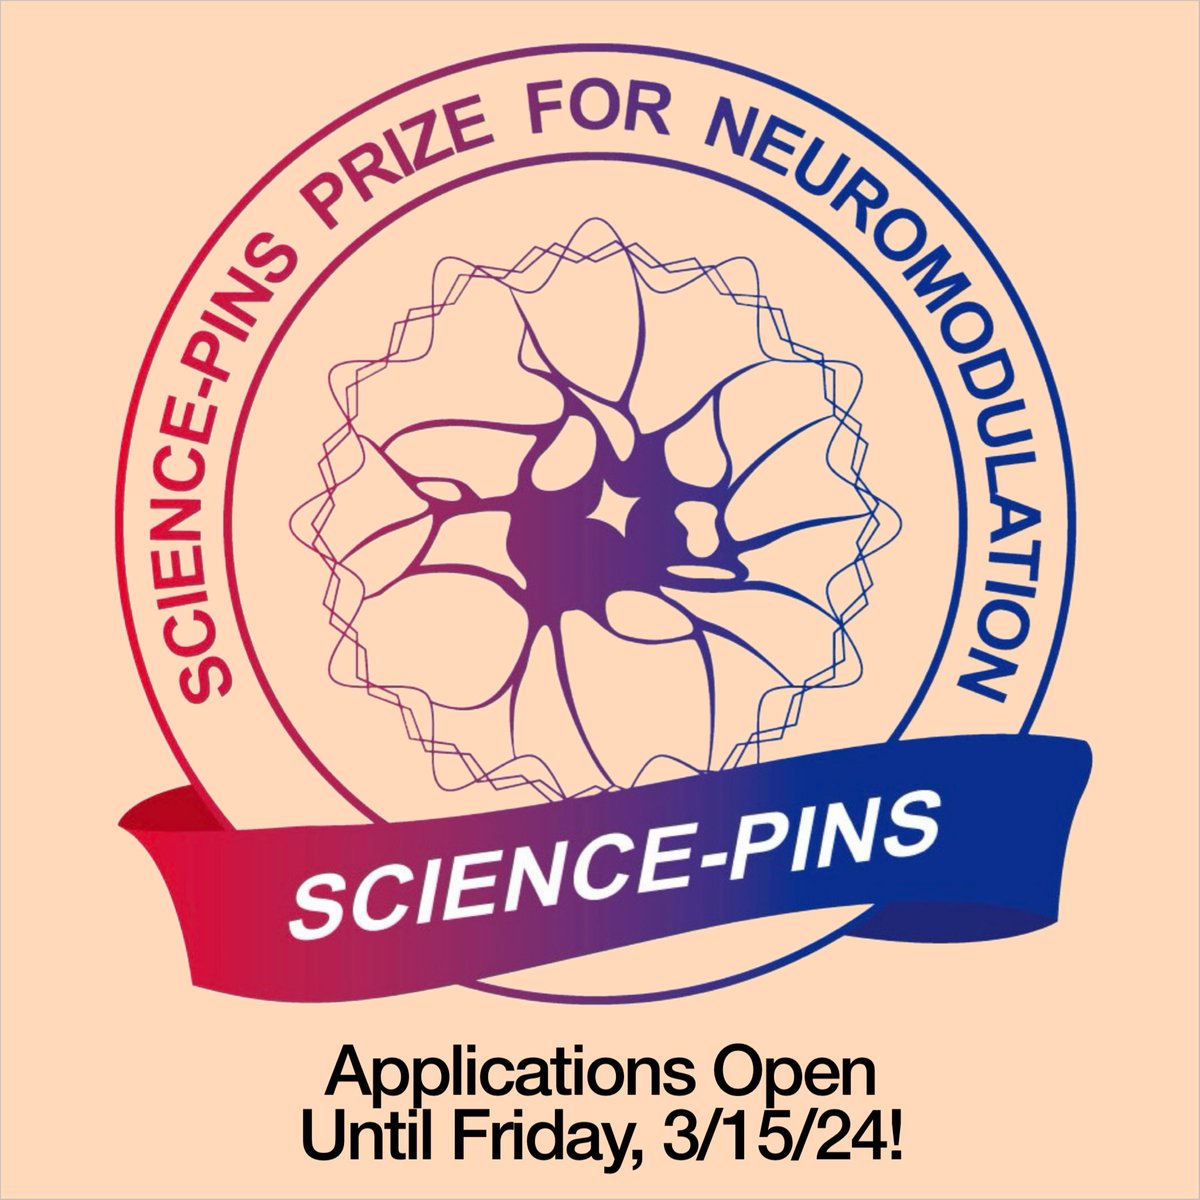 The international Science & PINS Prize is awarded annually to outstanding early-career researchers in the emerging field of neuromodulation. To enter, just write a 1000-word essay about your research performed in the last three years. Apply here: science.org/pins